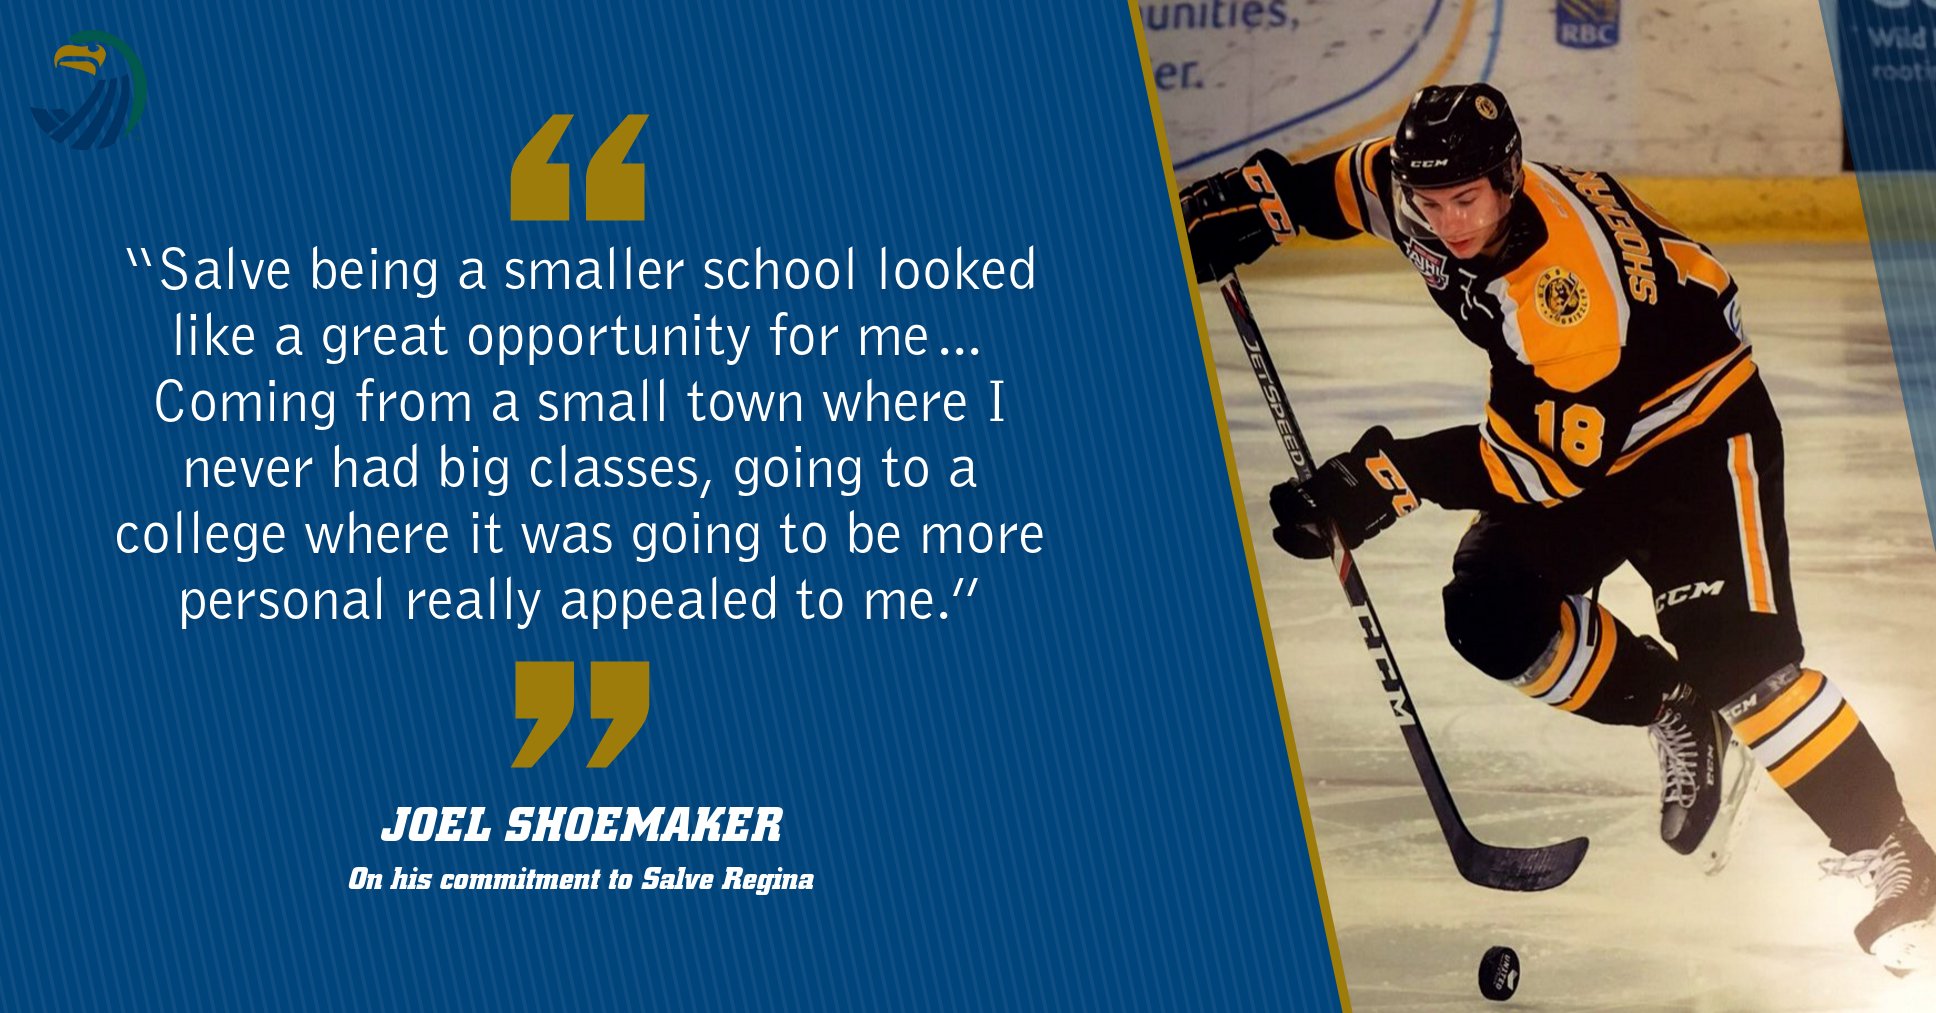 Shoemaker becomes the third player from Alberta, Canada to join the Seahawks for the 2020-21 season.